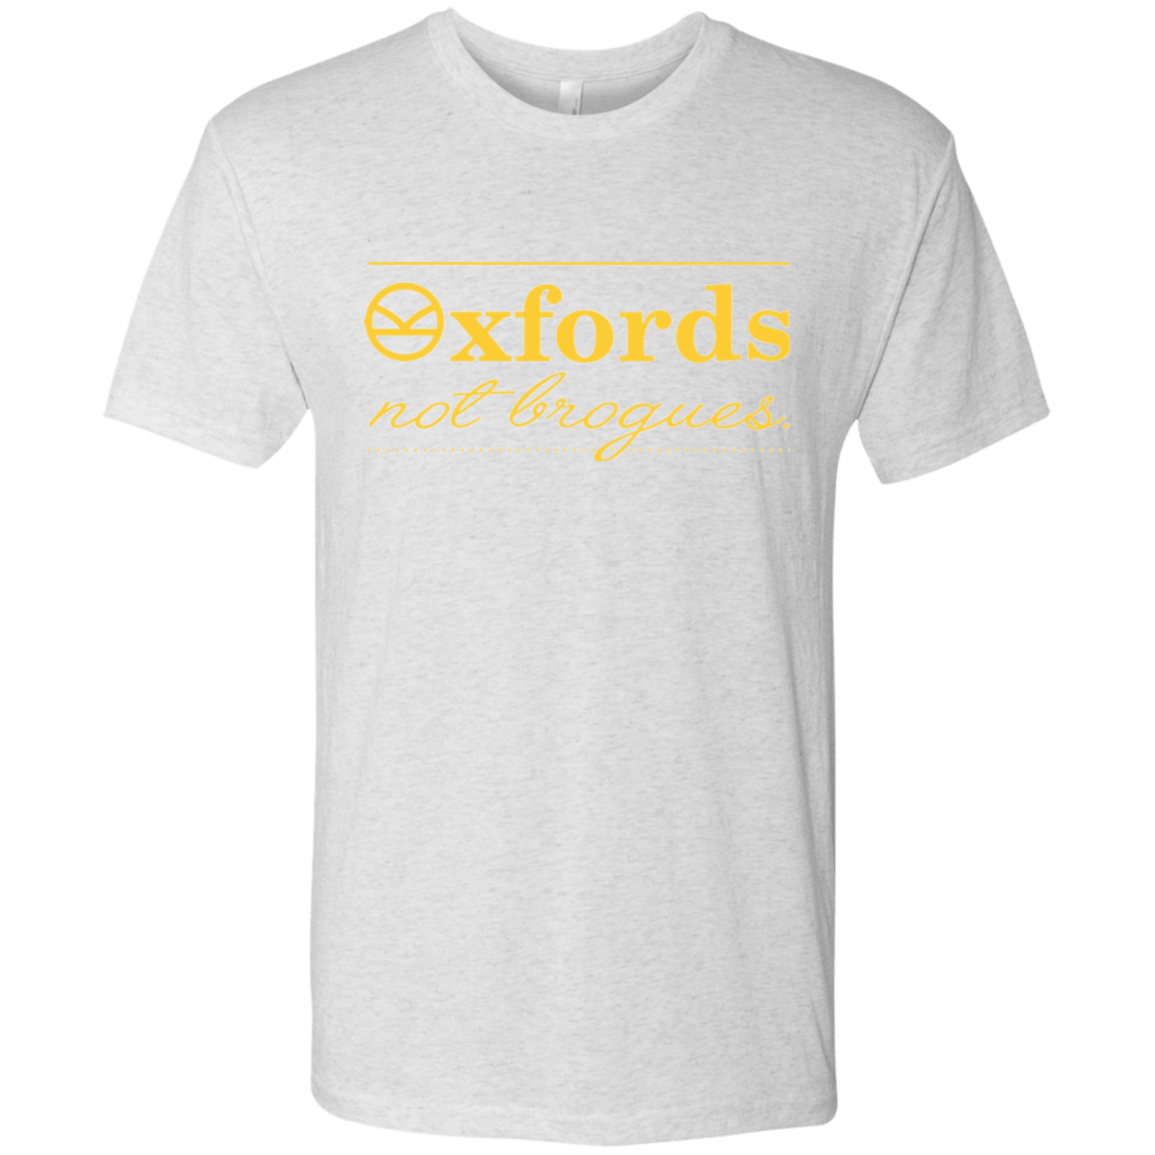 T-Shirts Heather White / Small Oxfords Not Brogues Men's Triblend T-Shirt